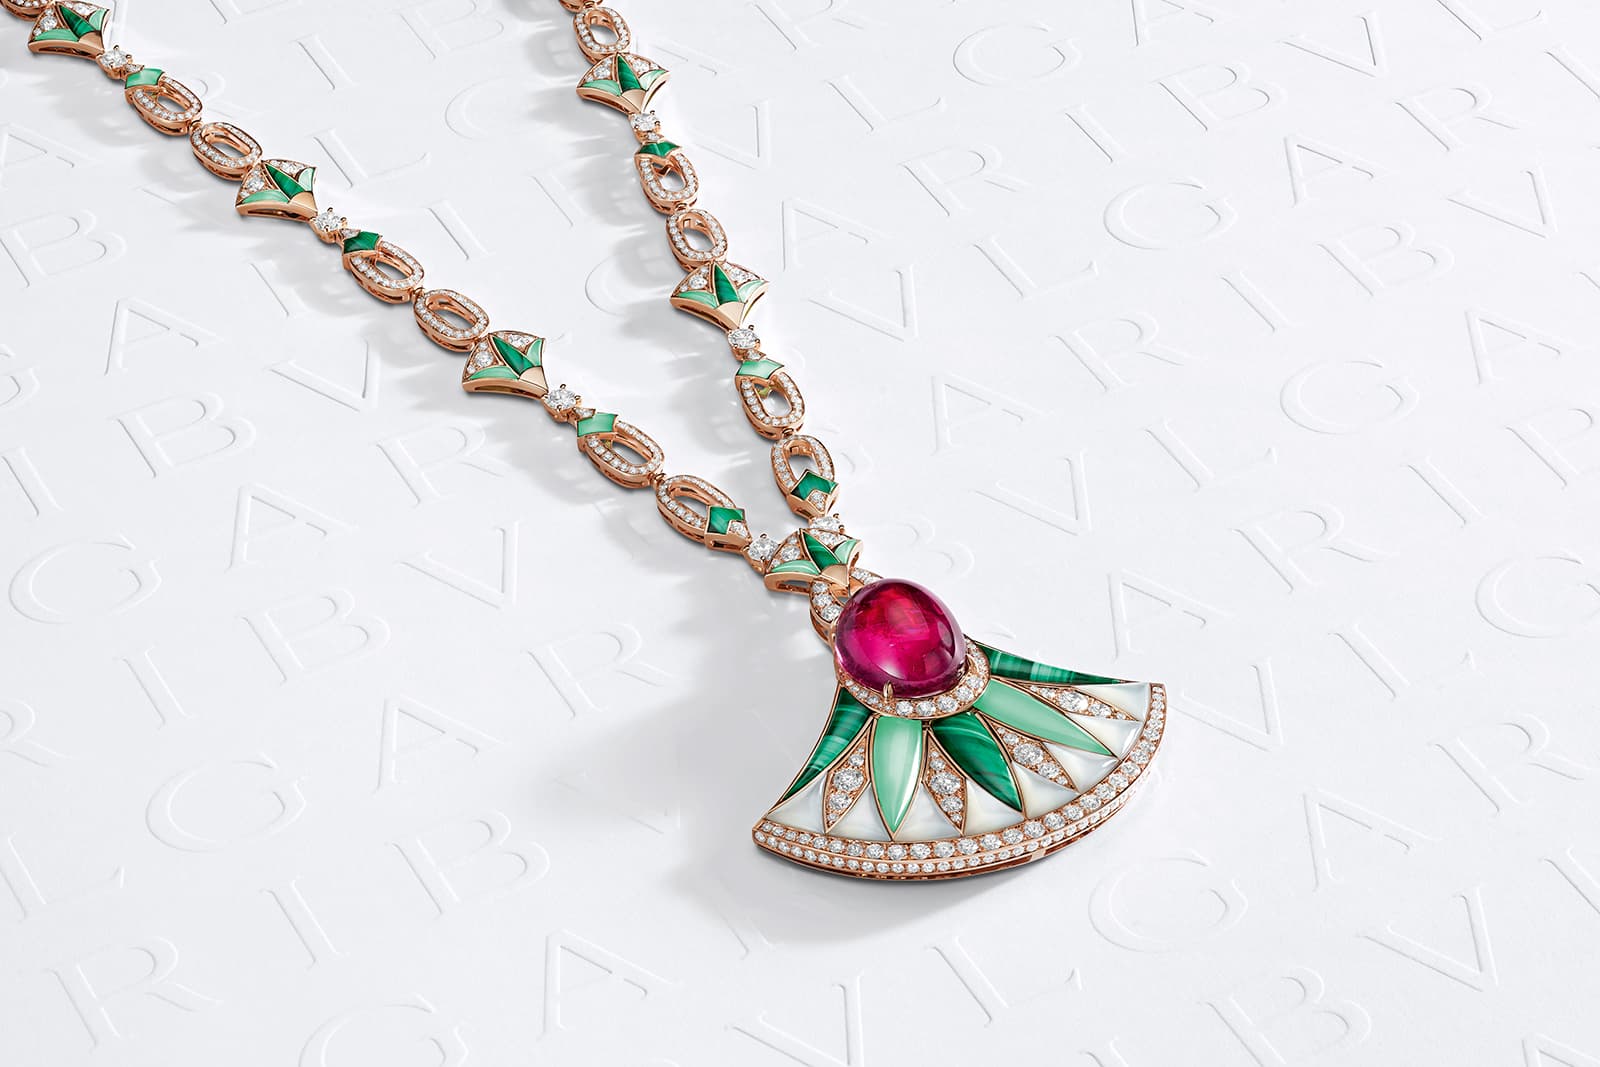 The Magnifica High Jewellery collection